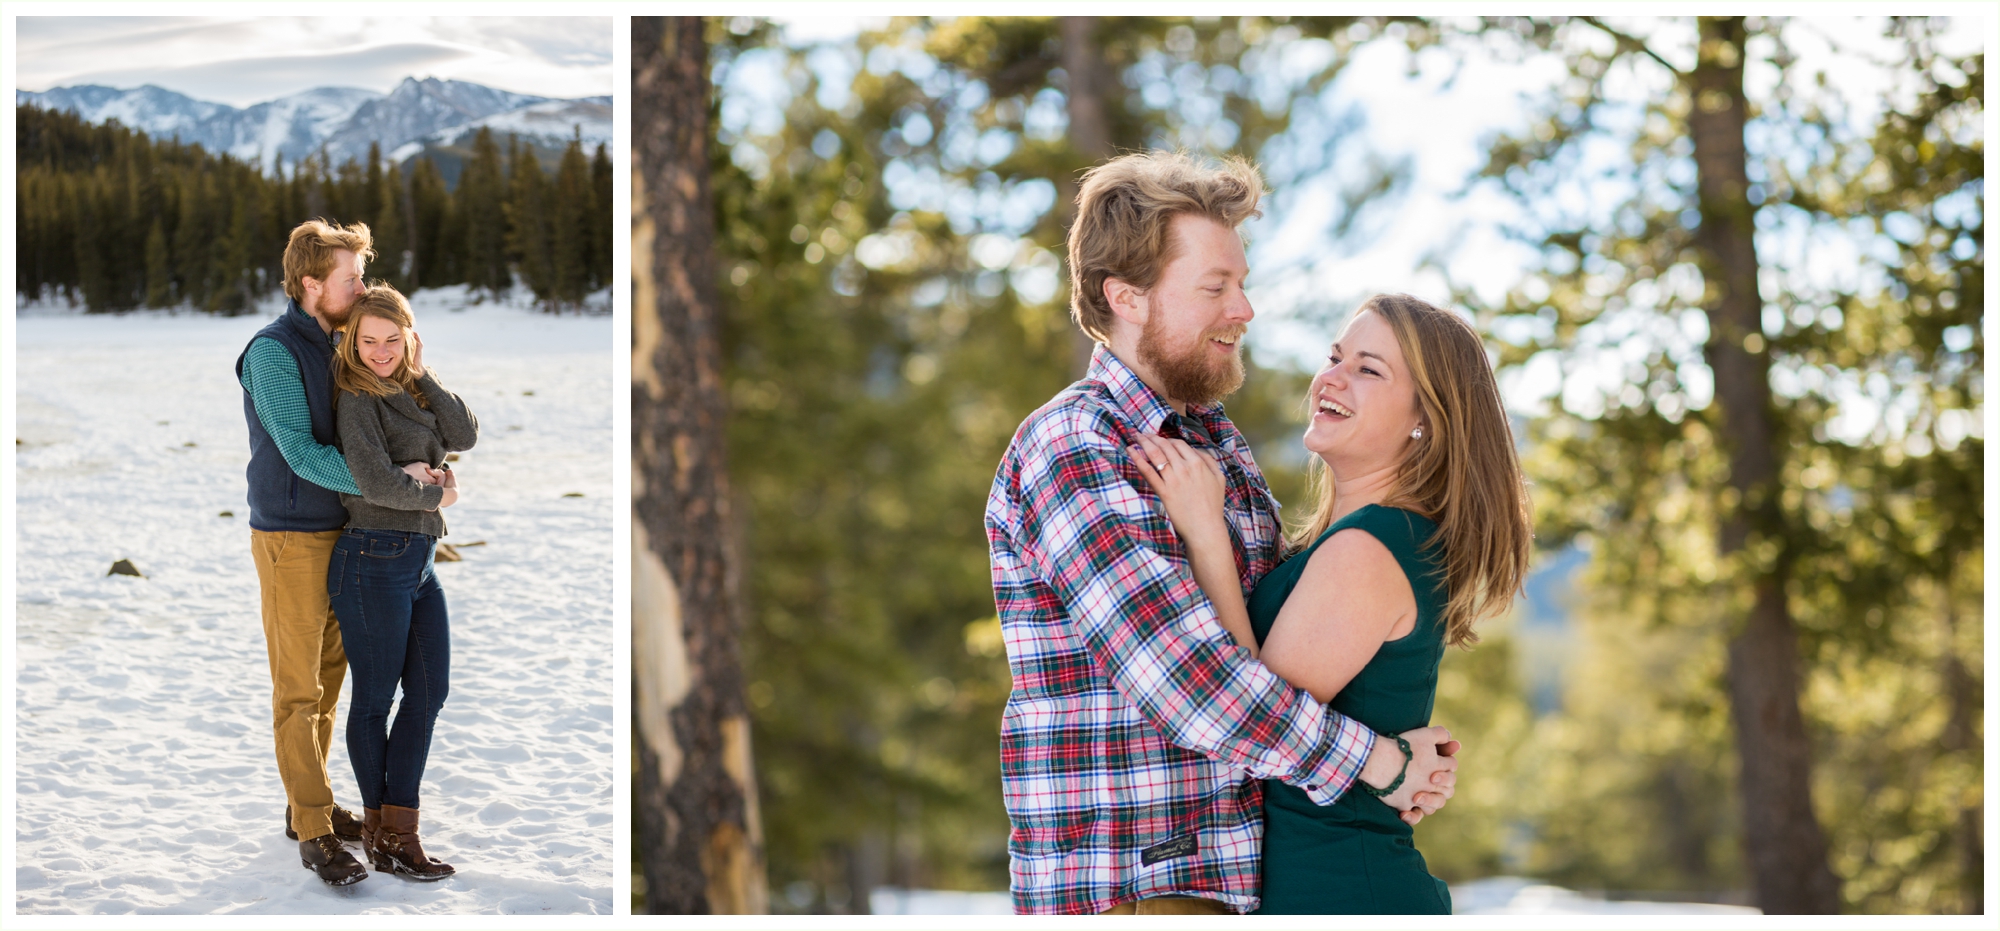 Echo Lake Park winter engagement session in the Colorado mountains. Colorado mountain wedding photographer. Colorado engagement photographer. natural candid Colorado engagement photography. Outdoor winter engagement photos in Colorado mountains. Colorado mountain wedding photographer. Plaid shirt green dress winter engagement outfits. bride laughs as groom tells her a funny joke. 